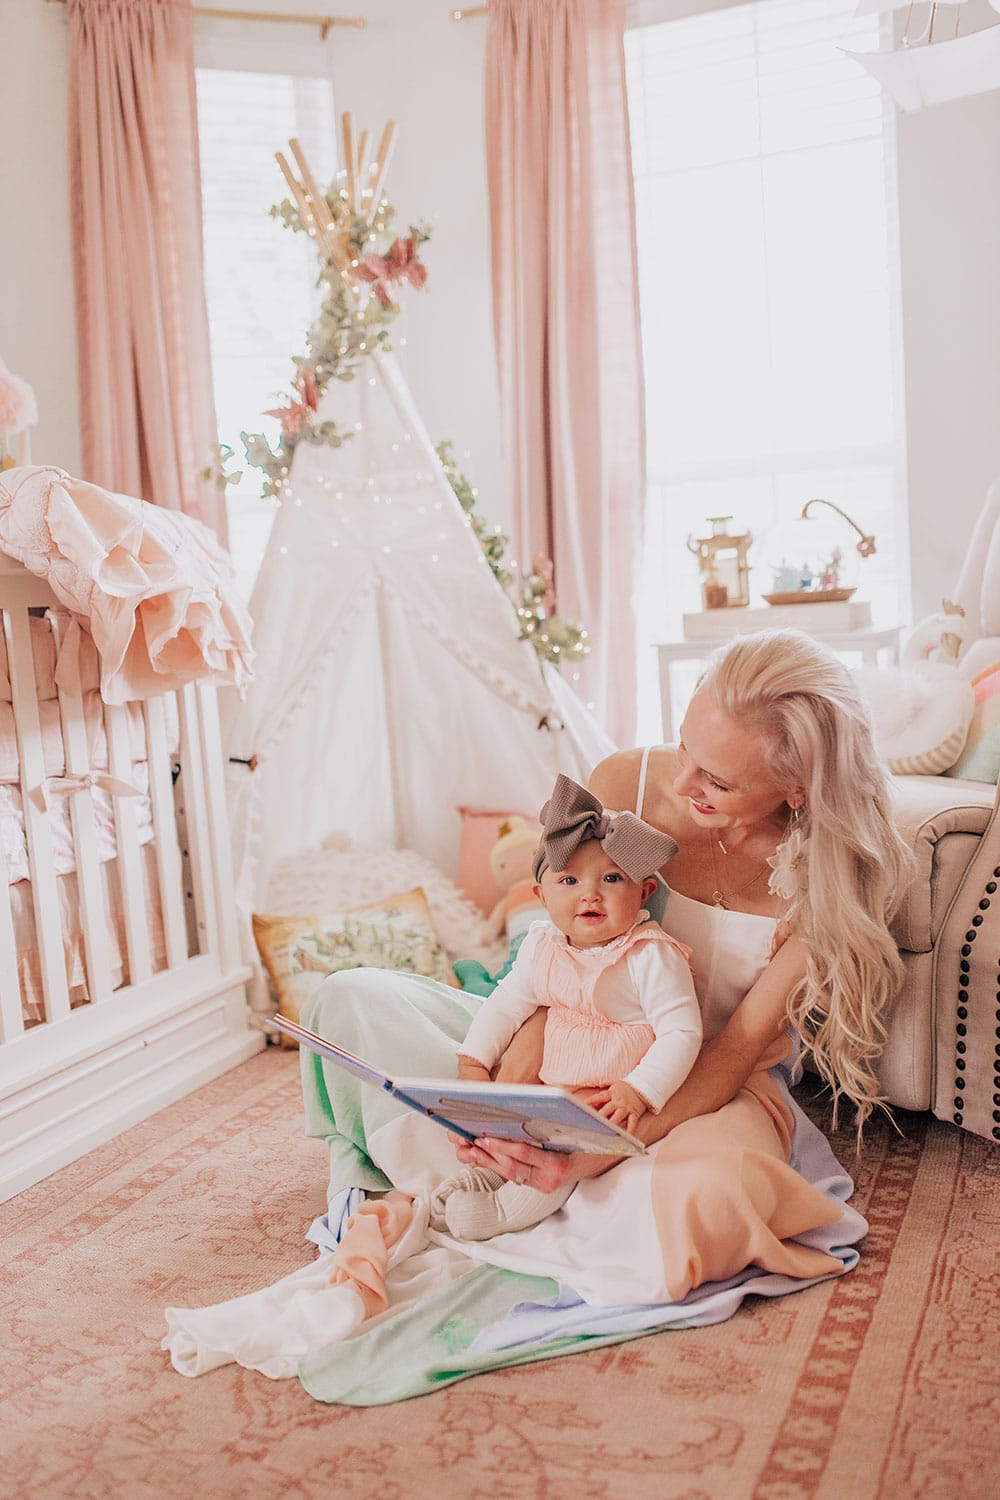 family photo ideas - mommy and me photography tips and poses - photoshoot in girl's nursery sitting with book